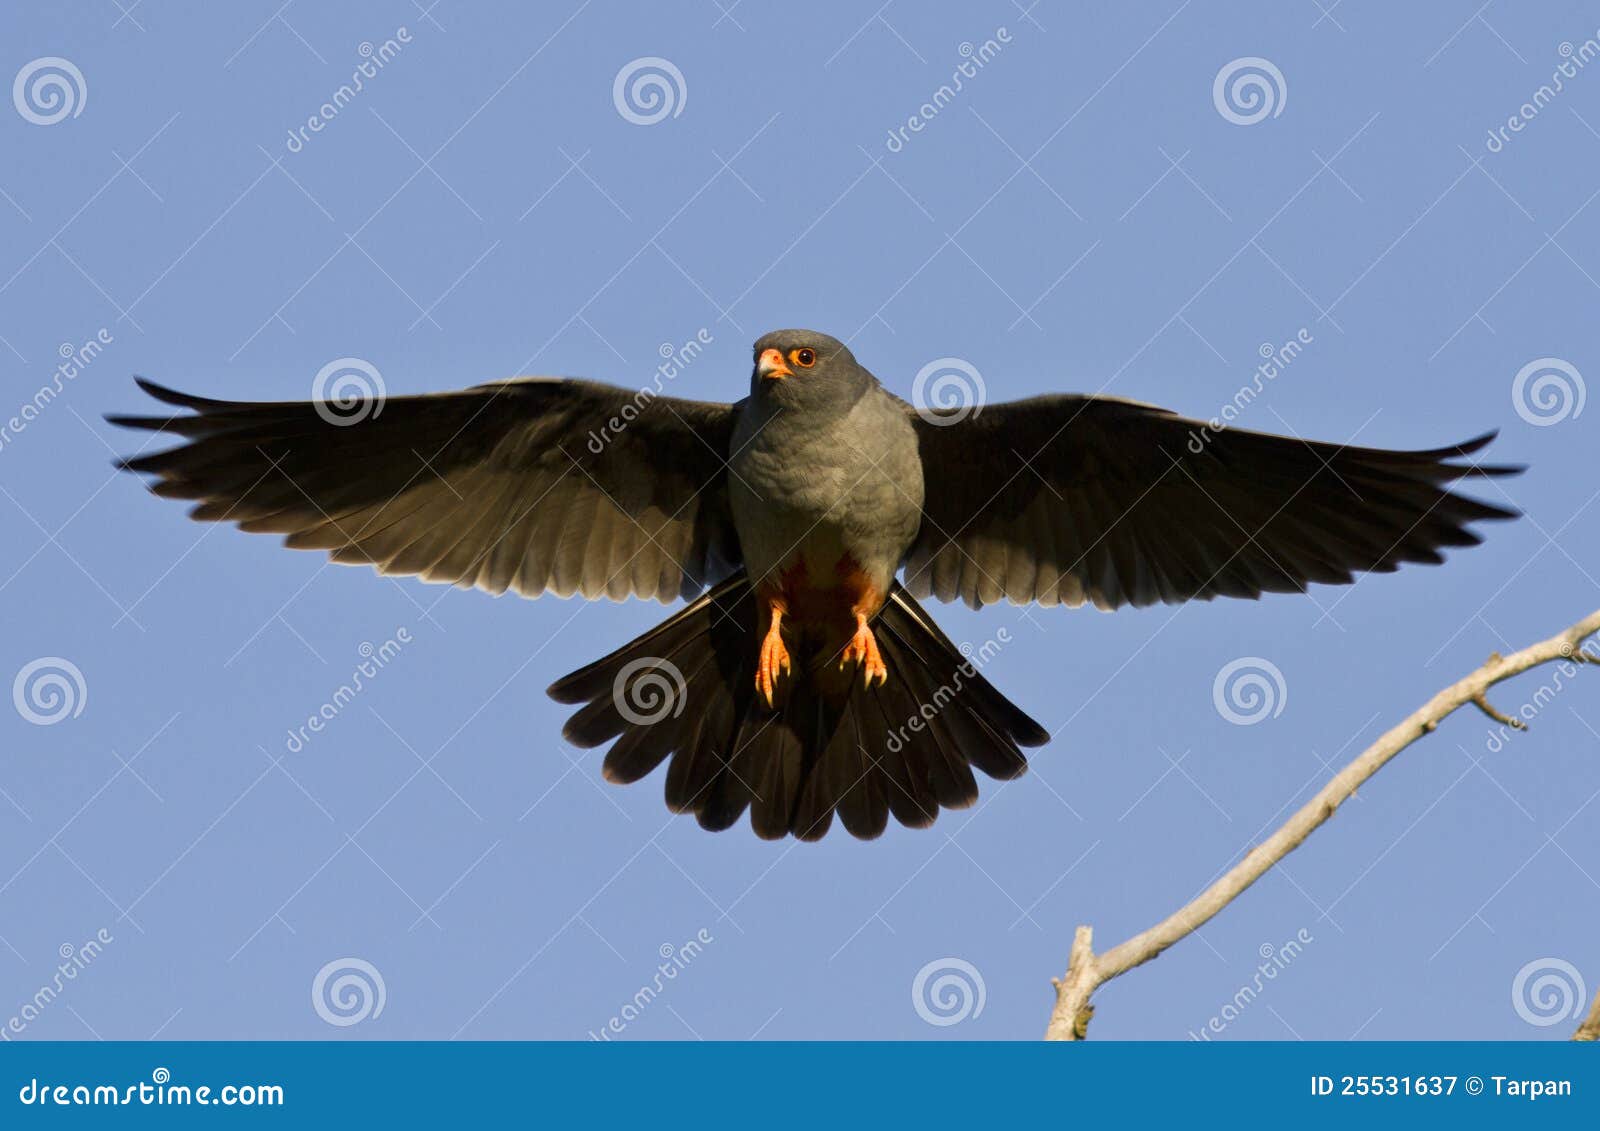 the male red-footed falcon.